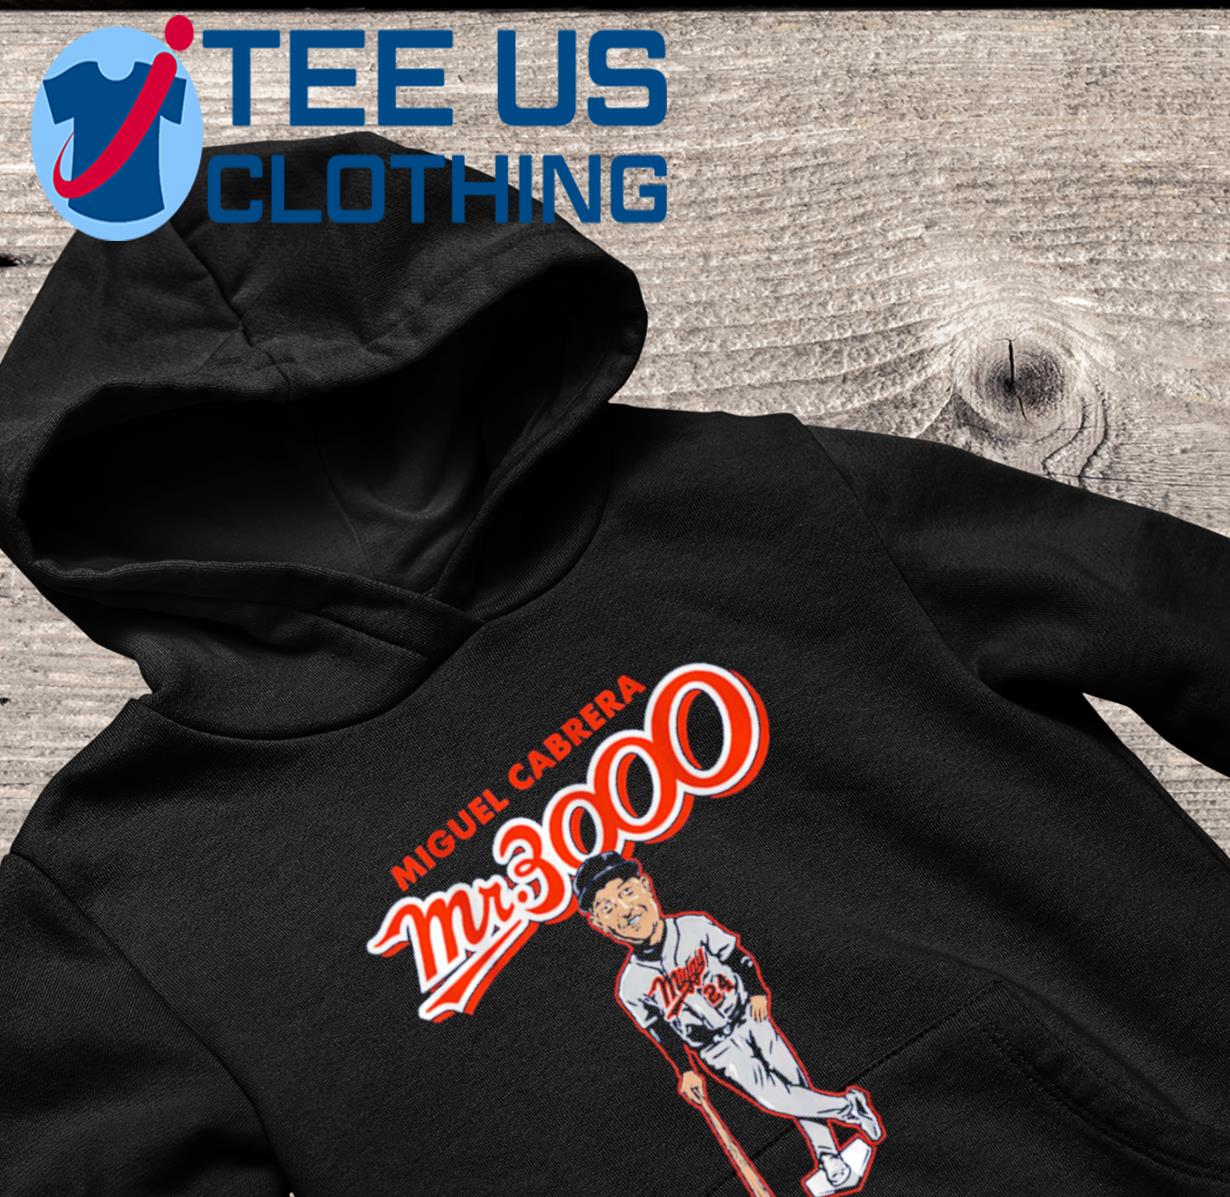 Miguel Cabrera Mr 3000 Hits Detroit Tee Shirt, hoodie, sweater and long  sleeve